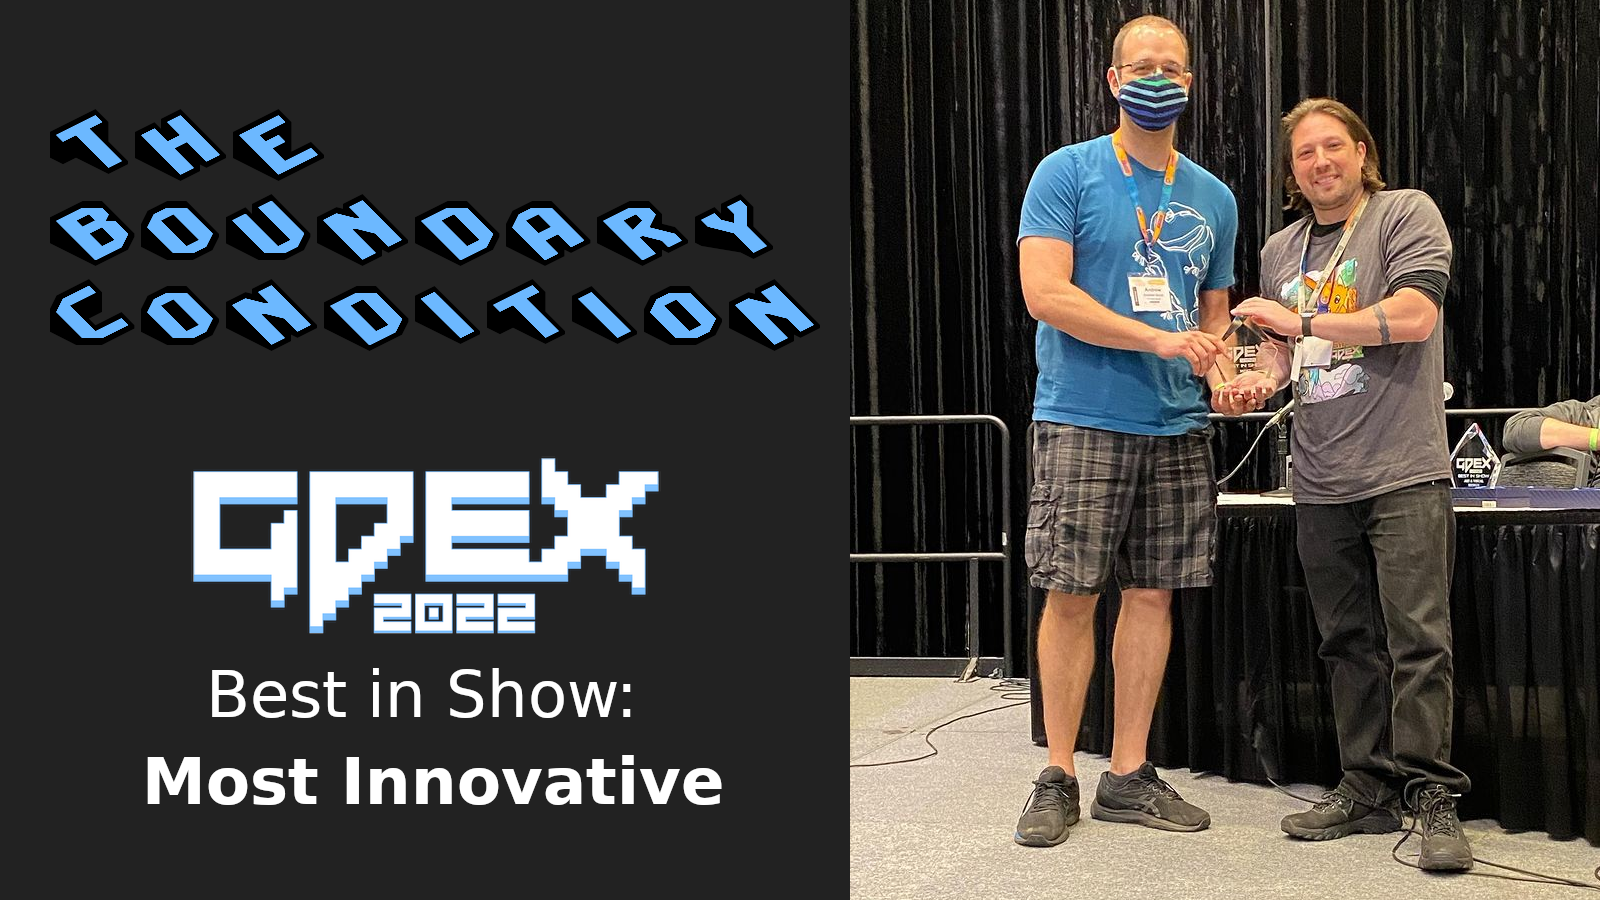 The Boundary Condition, GDEX 2022, Best in Show: Most Innovative